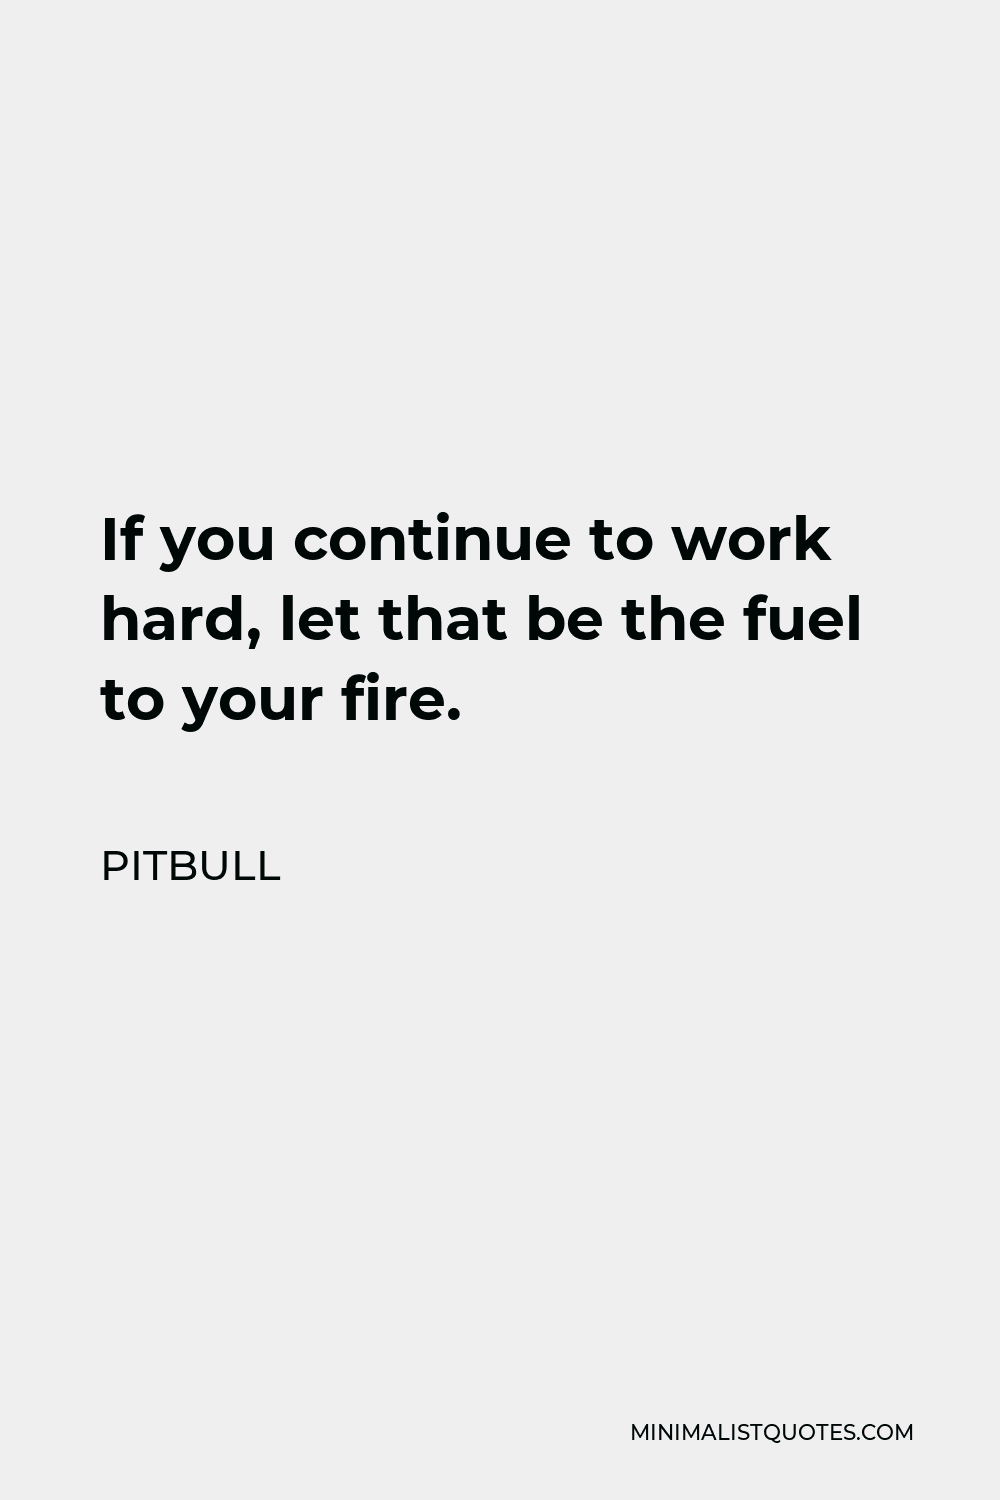 Pitbull Quote - If you continue to work hard, let that be the fuel to your fire.